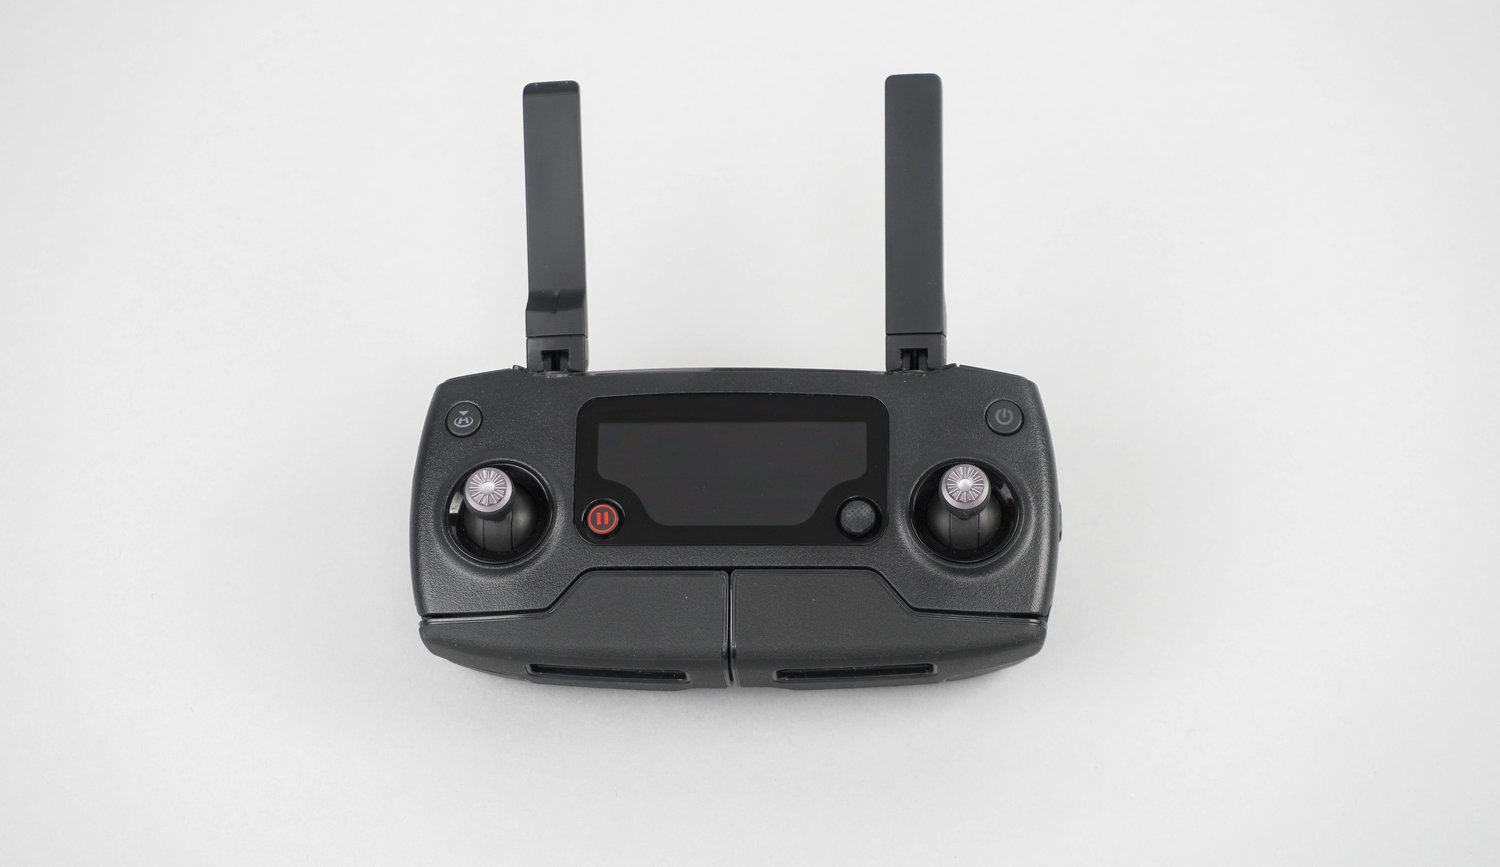 Both the Mavic and its controller are designed to be extremely compact